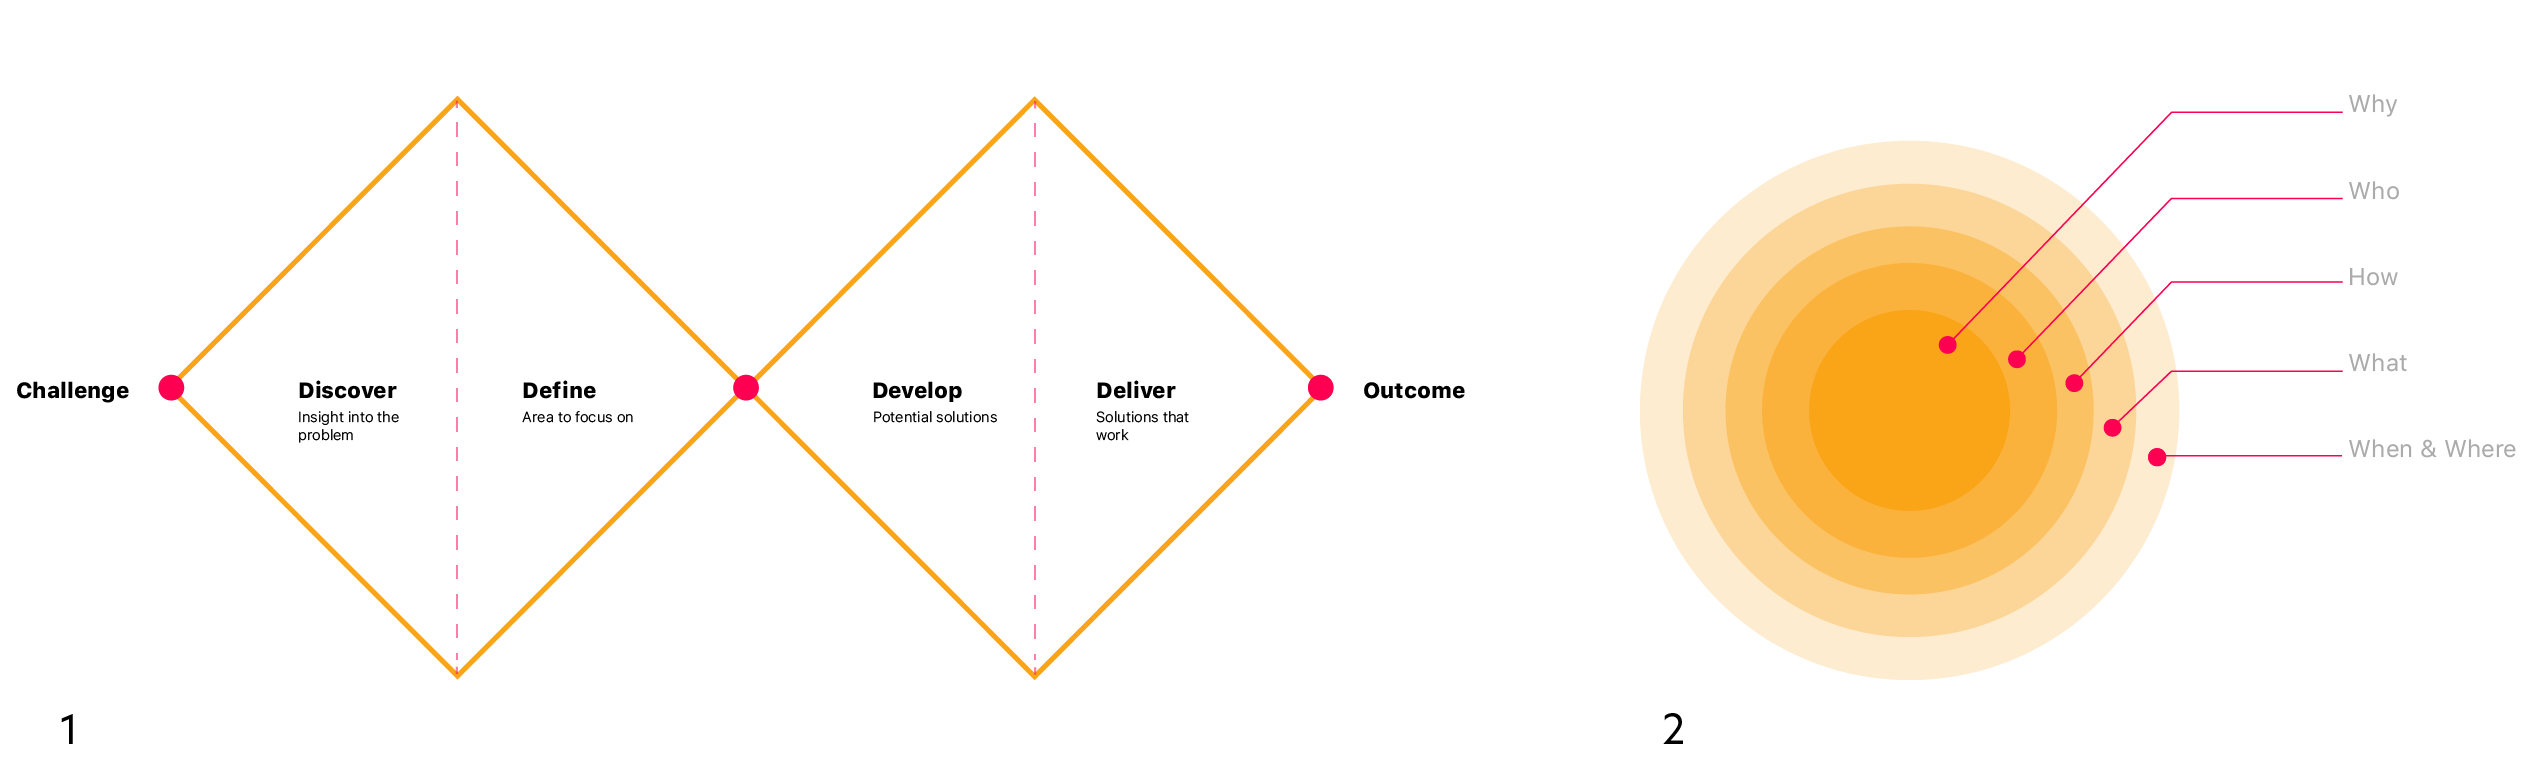 the double diamond model and five ws